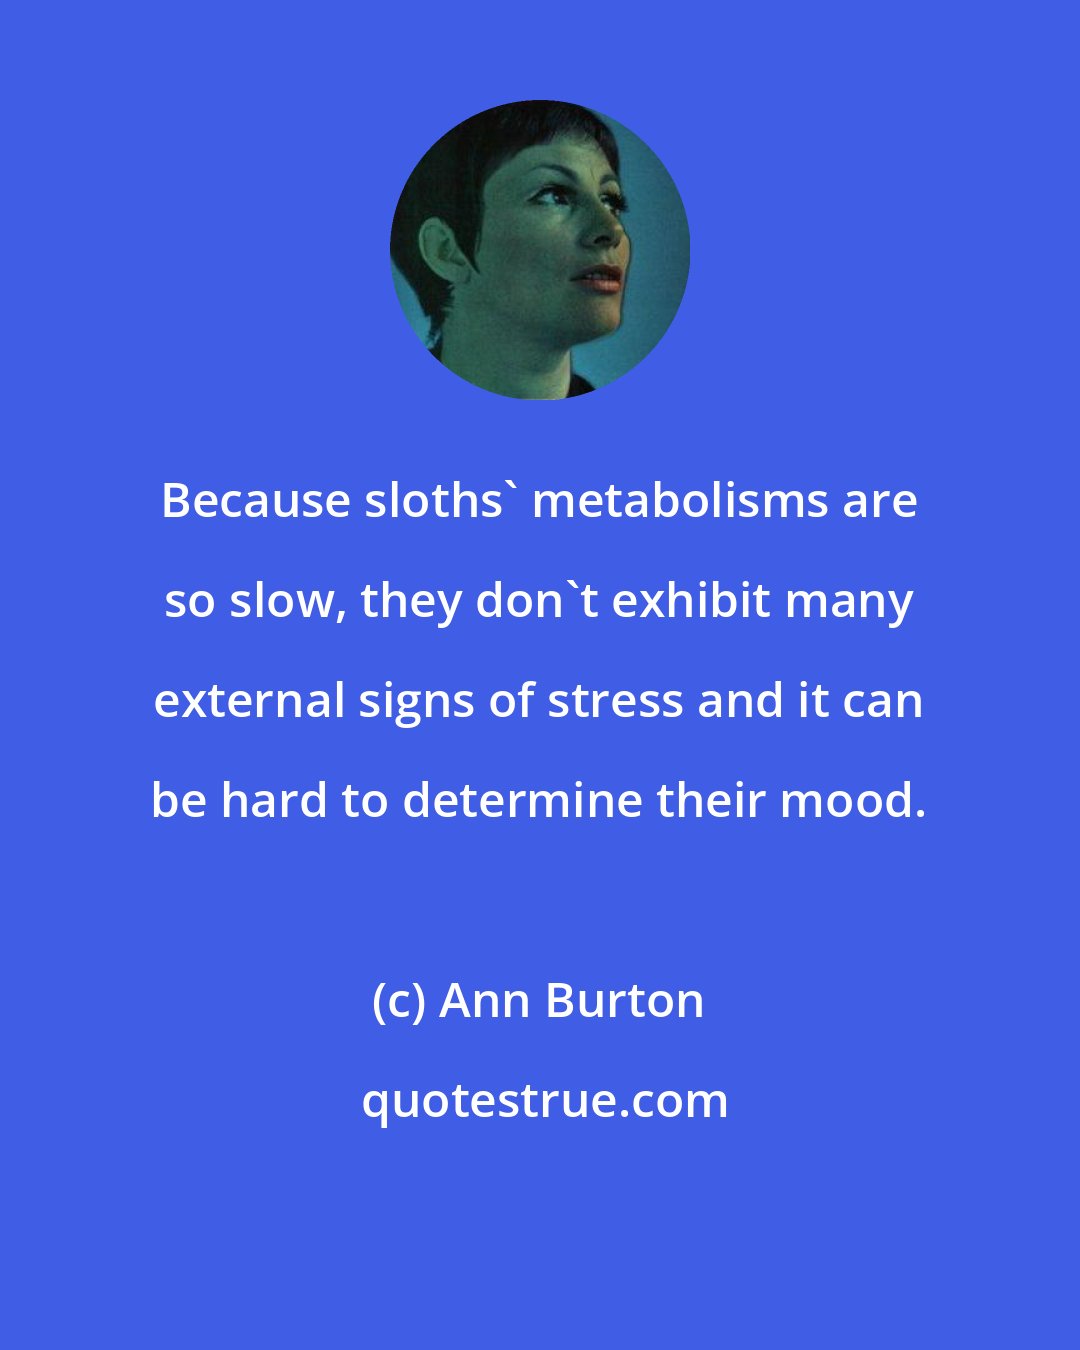 Ann Burton: Because sloths' metabolisms are so slow, they don't exhibit many external signs of stress and it can be hard to determine their mood.